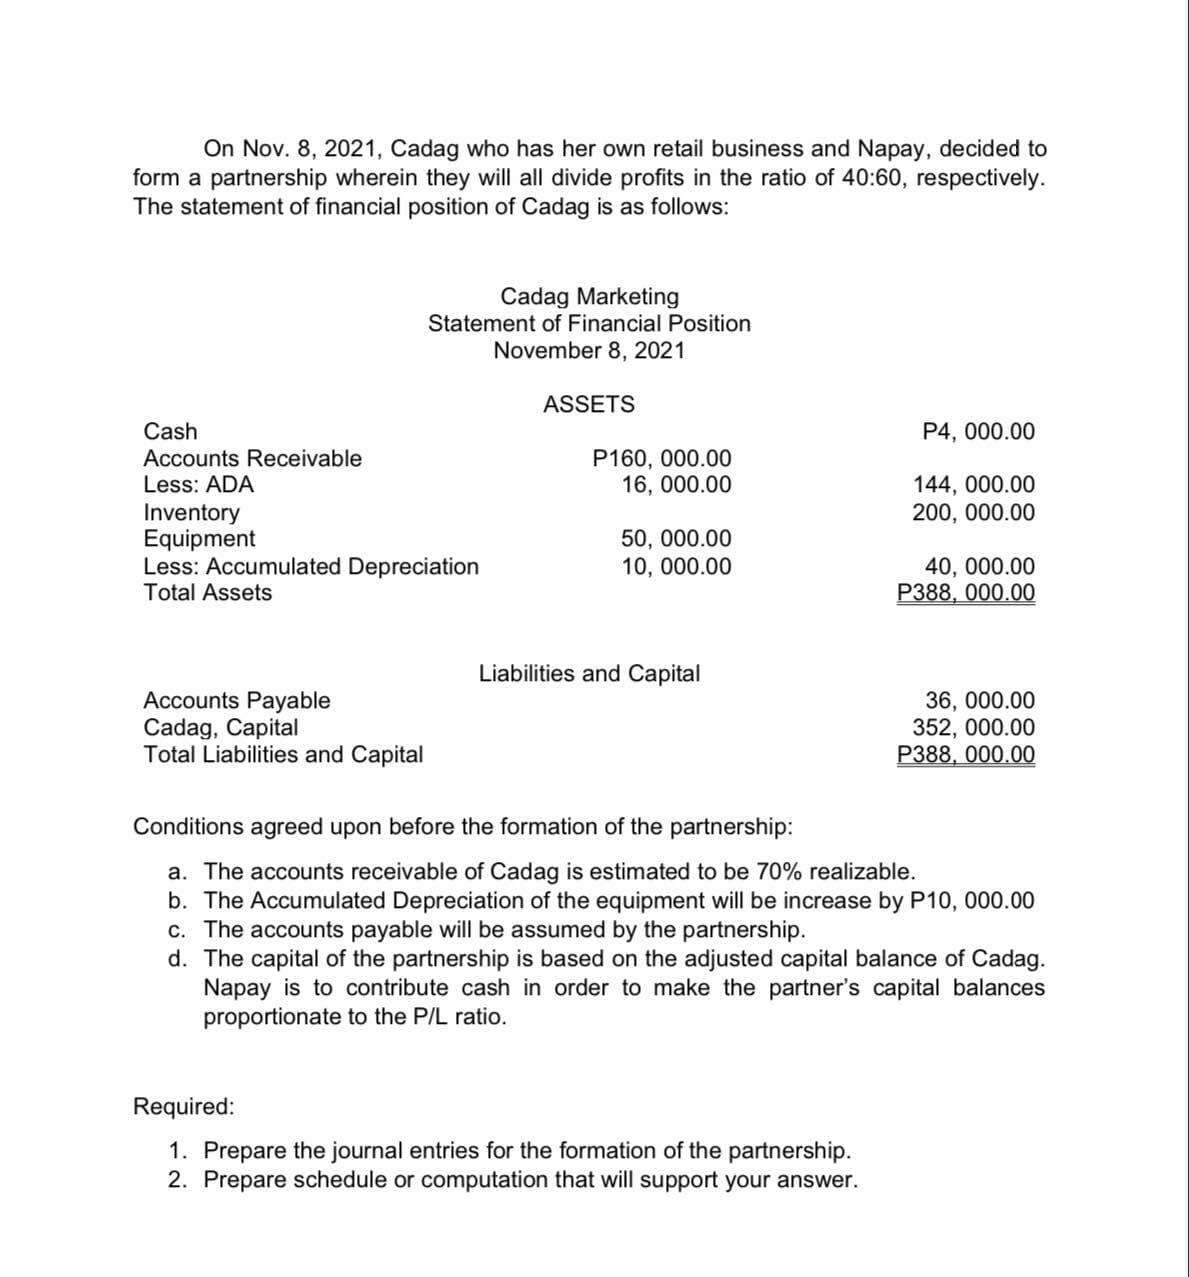 On Nov. 8, 2021, Cadag who has her own retail business and Napay, decided to
form a partnership wherein they will all divide profits in the ratio of 40:60, respectively.
The statement of financial position of Cadag is as follows:
Cadag Marketing
Statement of Financial Position
November 8, 2021
ASSETS
Cash
Accounts Receivable
Less: ADA
P4, 000.00
P160, 000.00
16, 000.00
144, 000.00
200, 000.00
Inventory
Equipment
Less: Accumulated Depreciation
Total Assets
50, 000.00
10, 000.00
40, 000.00
P388, 000.00
Liabilities and Capital
Accounts Payable
Cadag, Capital
Total Liabilities and Capital
36, 000.00
352, 000.00
P388, 000.00
Conditions agreed upon before the formation of the partnership:
a. The accounts receivable of Cadag is estimated to be 70% realizable.
b. The Accumulated Depreciation of the equipment will be increase by P10, 000.00
c. The accounts payable will be assumed by the partnership.
d. The capital of the partnership is based on the adjusted capital balance of Cadag.
Napay is to contribute cash in order to make the partner's capital balances
proportionate to the P/L ratio.
Required:
1. Prepare the journal entries for the formation of the partnership.
2. Prepare schedule or computation that will support your answer.
